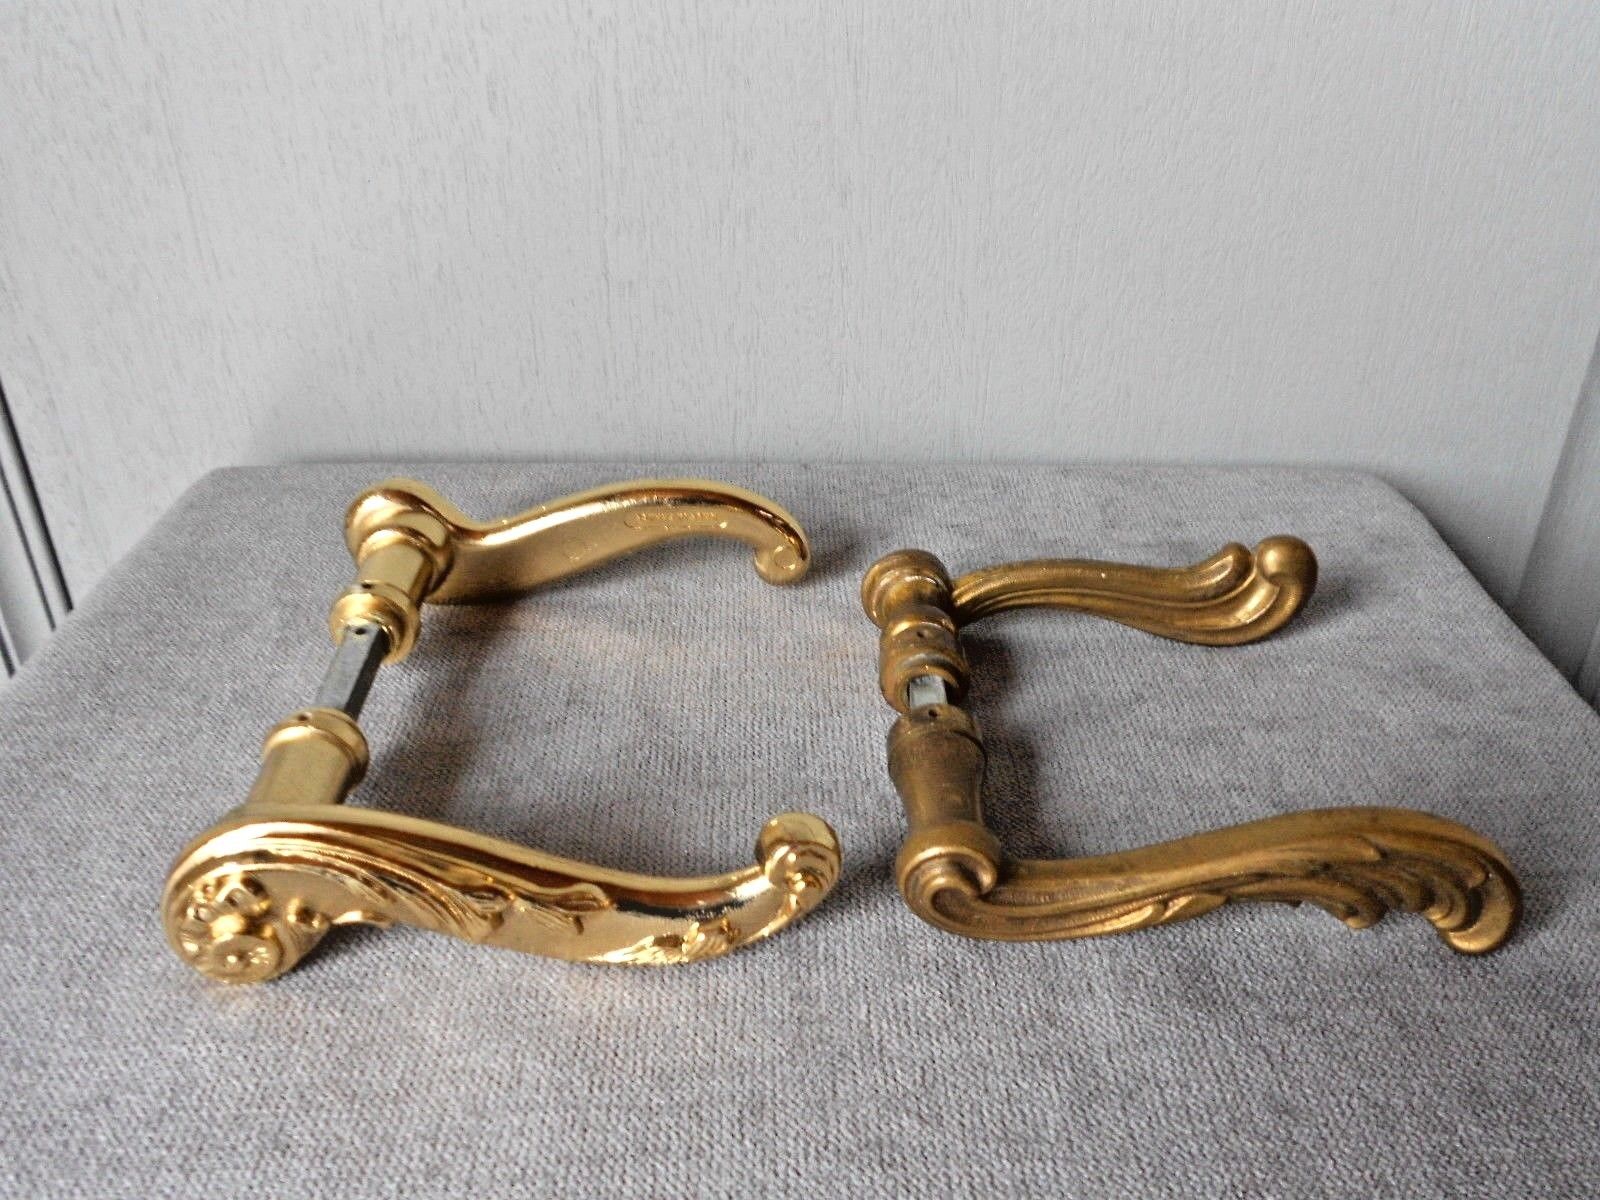 4 vintage FRENCH gilded STYLISH Door HANDLES PULLS marked FRANCE